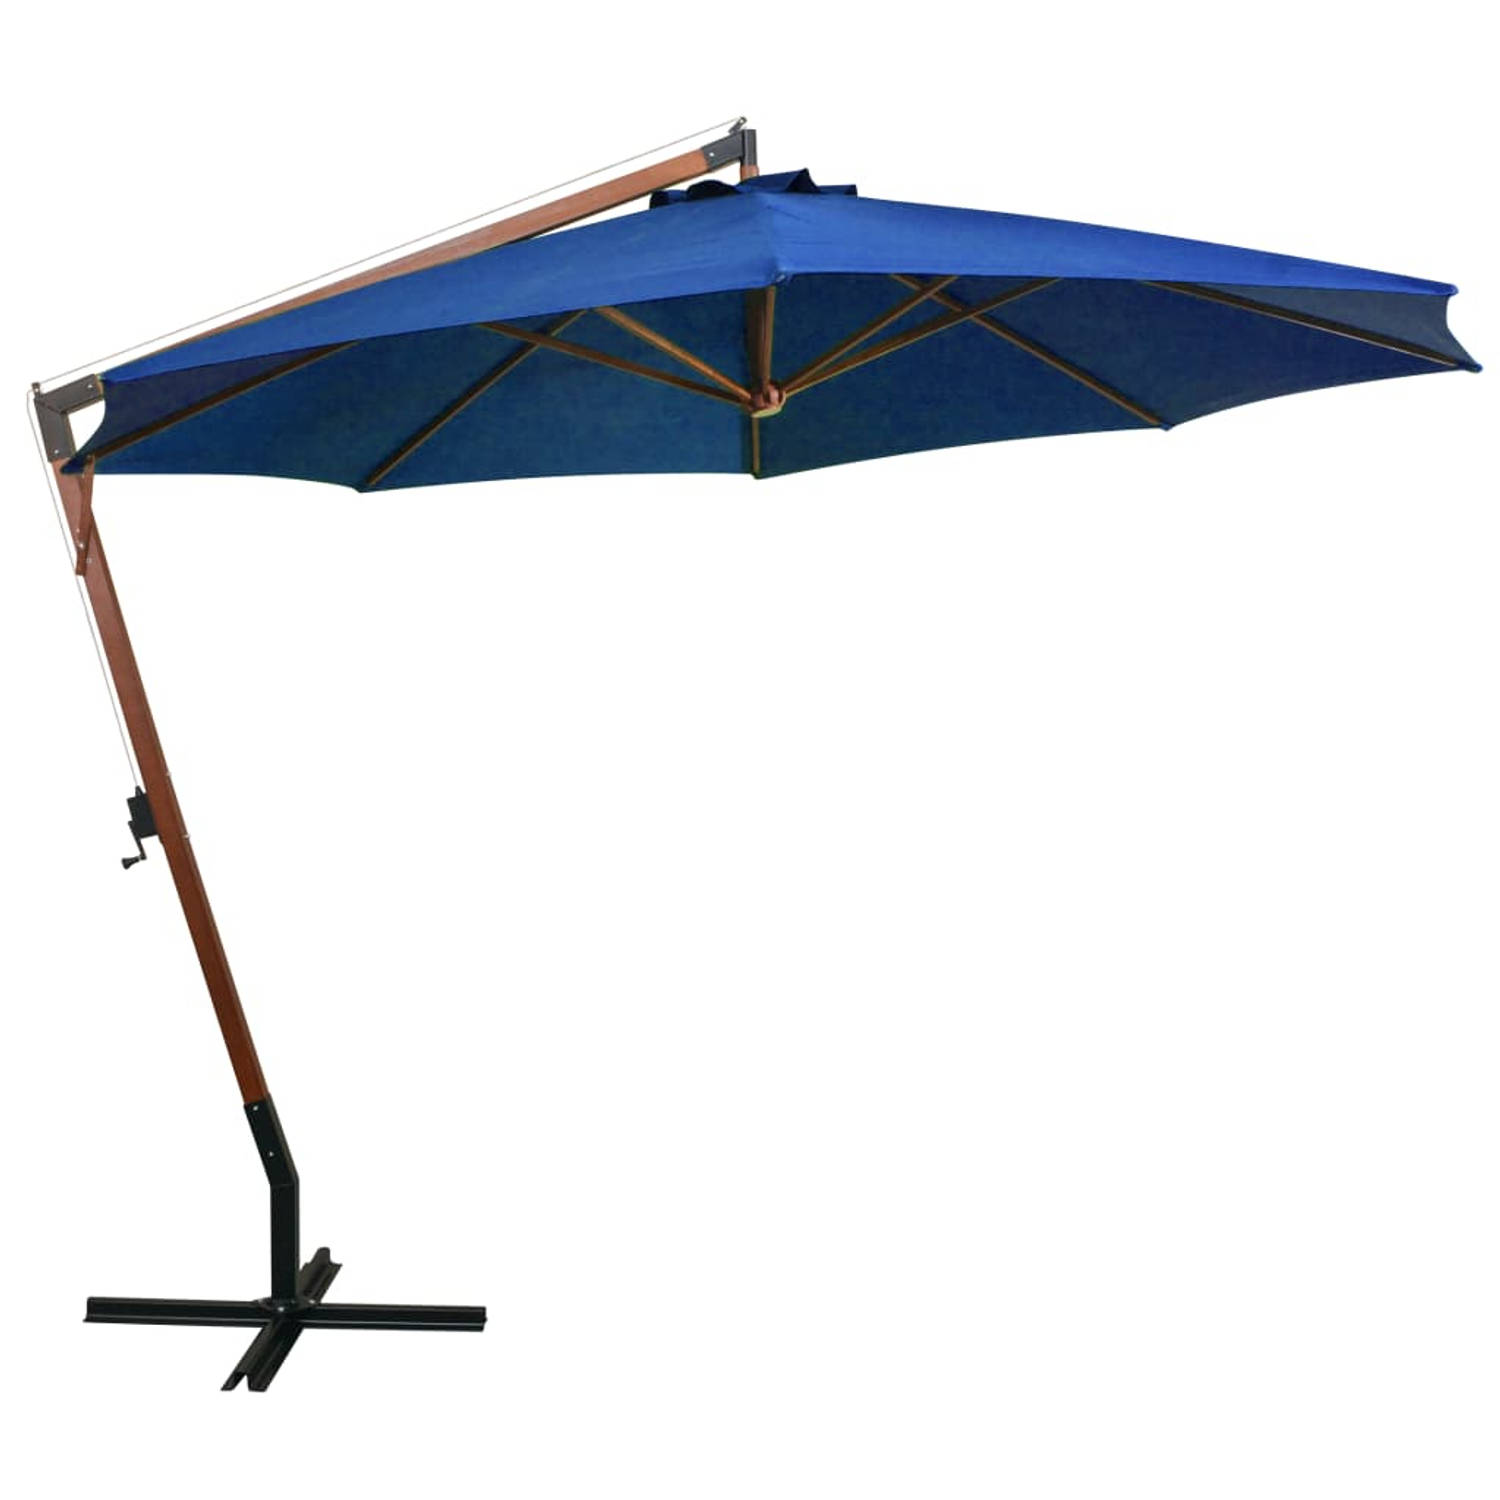 The Living Store Zweefparasol - Hout - azuurblauw - 350 cm